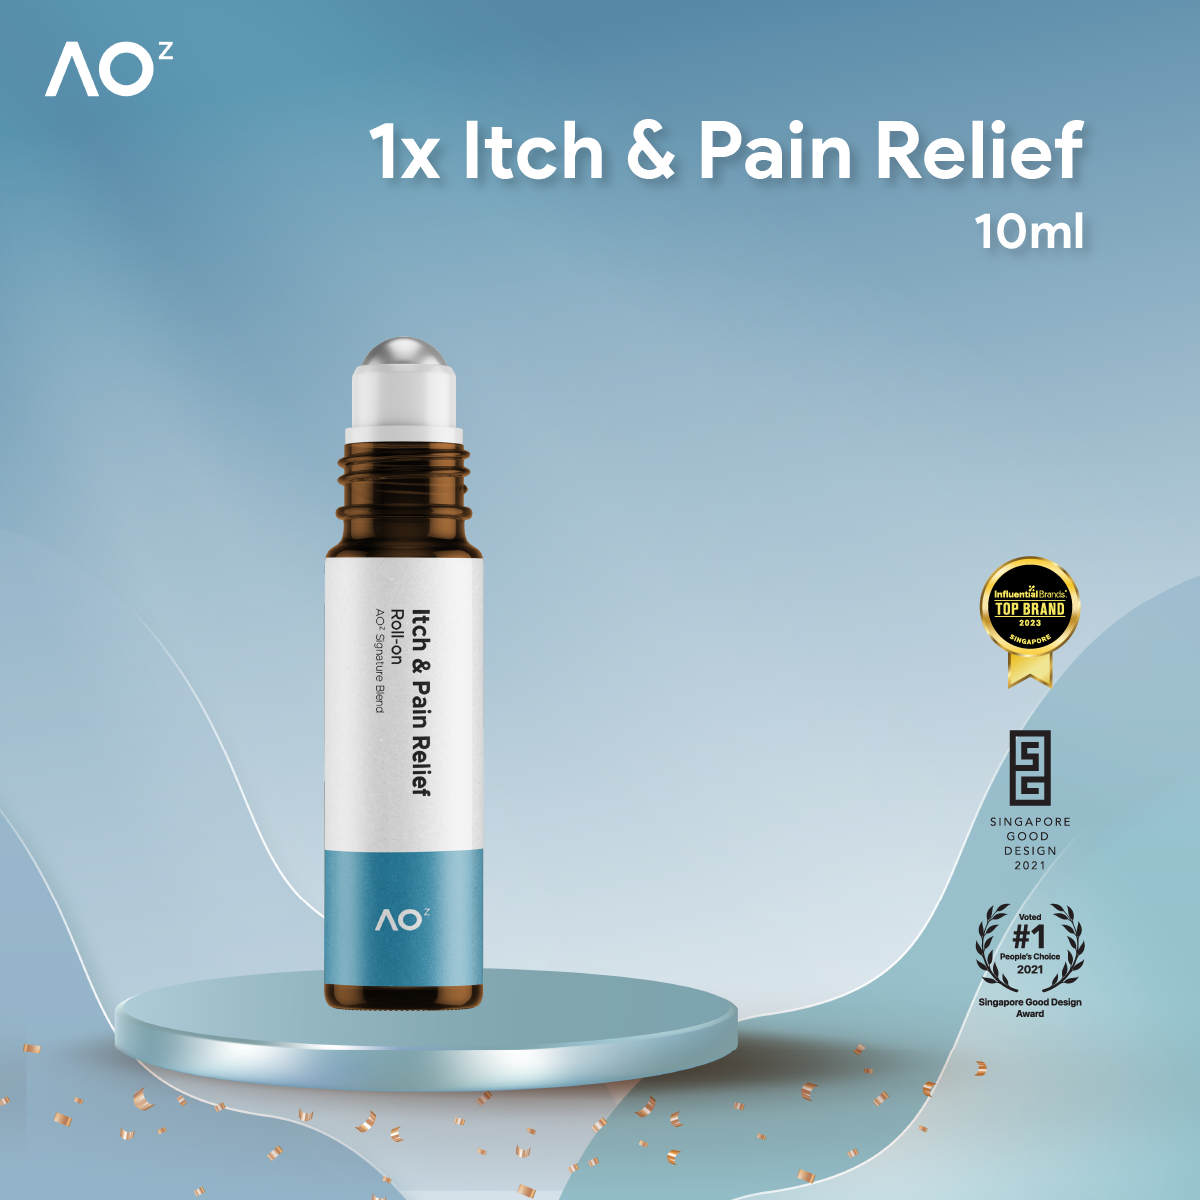 Itch & Pain Relief